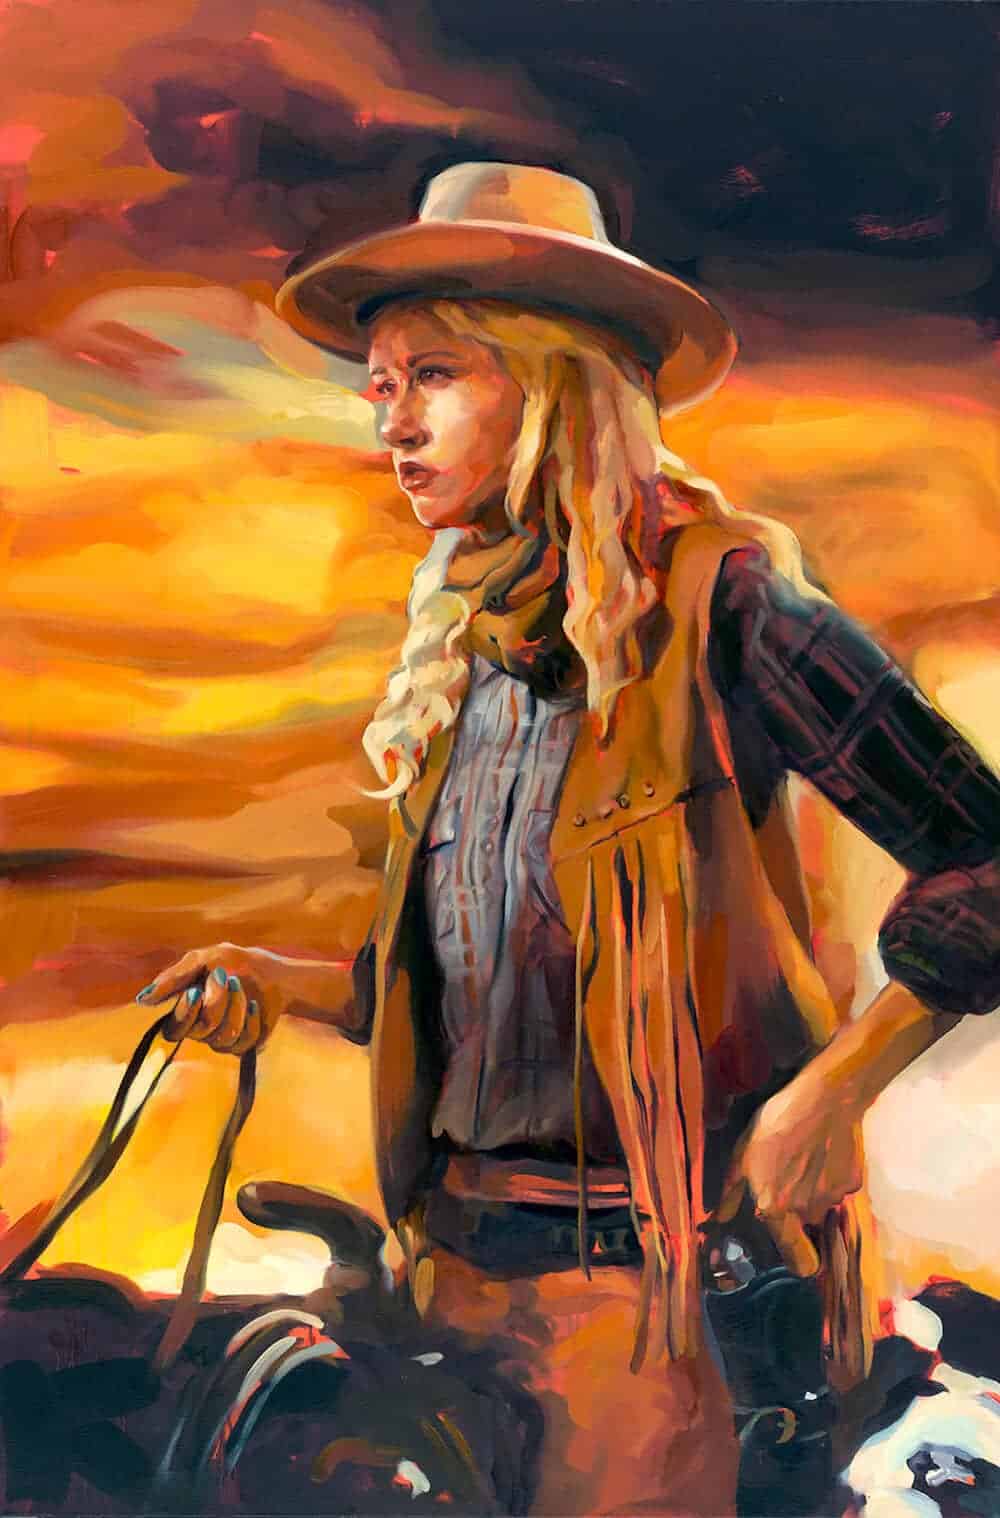 Krimmie Wayne in “The Searchers”, 2013. Oil on canvas, 60″ x 40″.